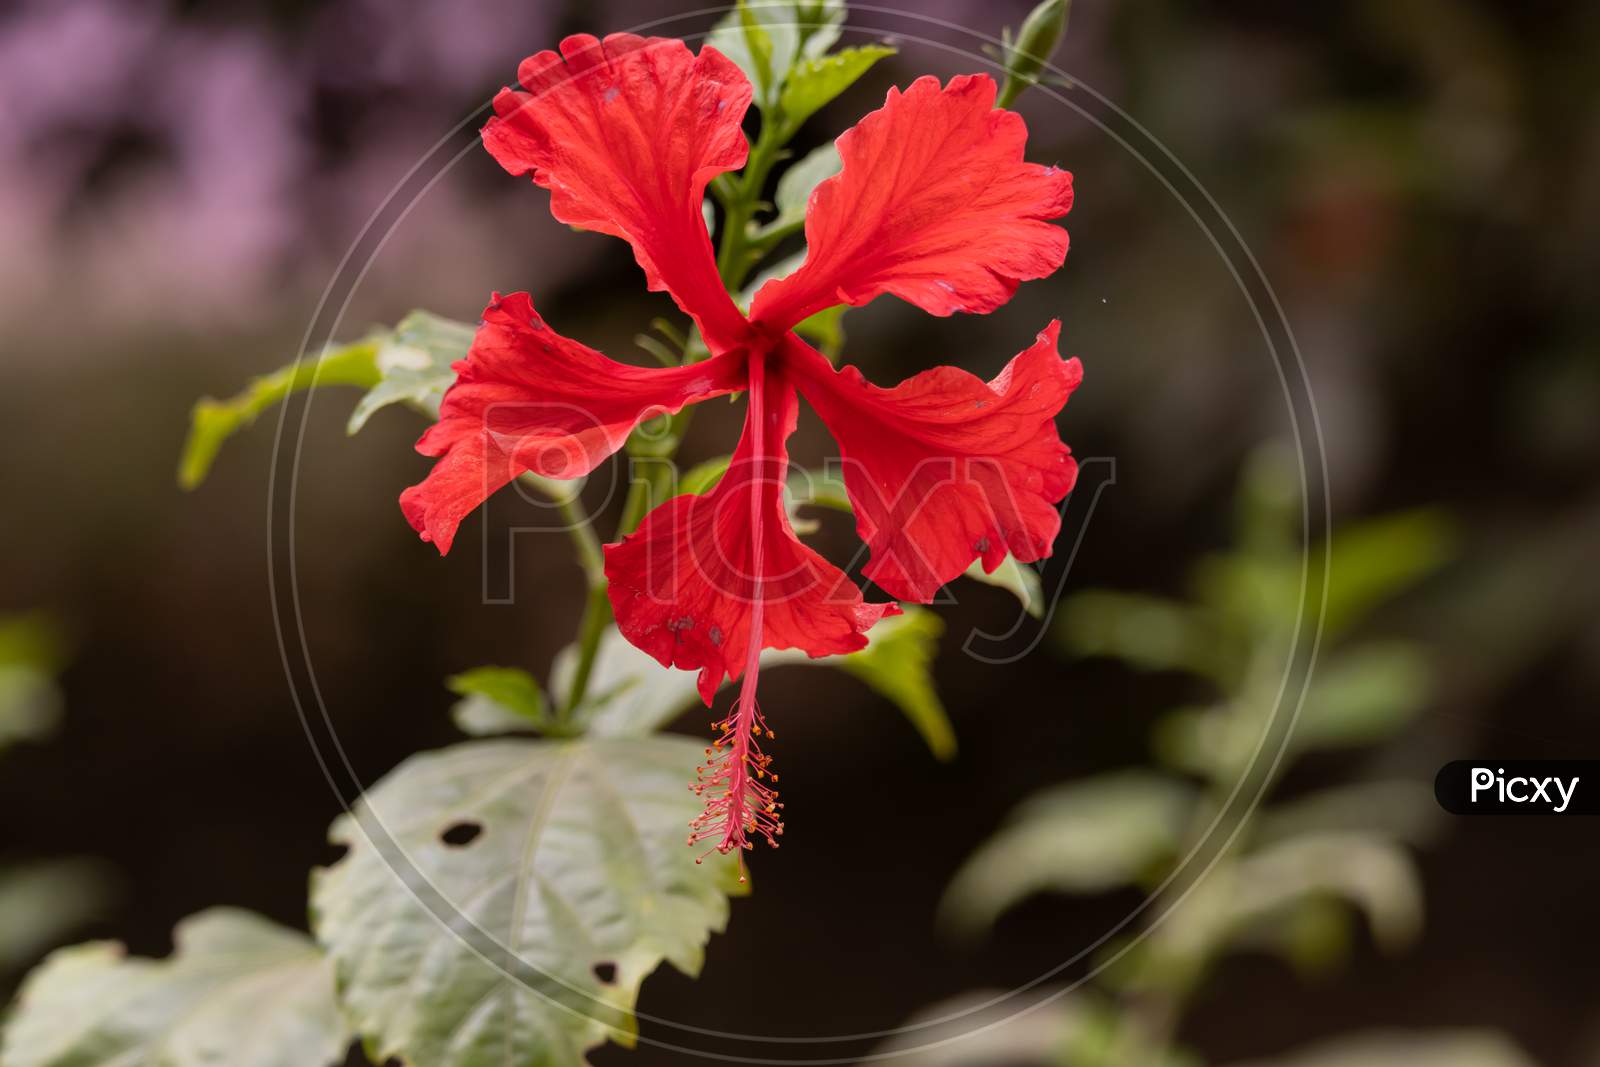 Hibiscus Flower Blooming With Five Red Petals